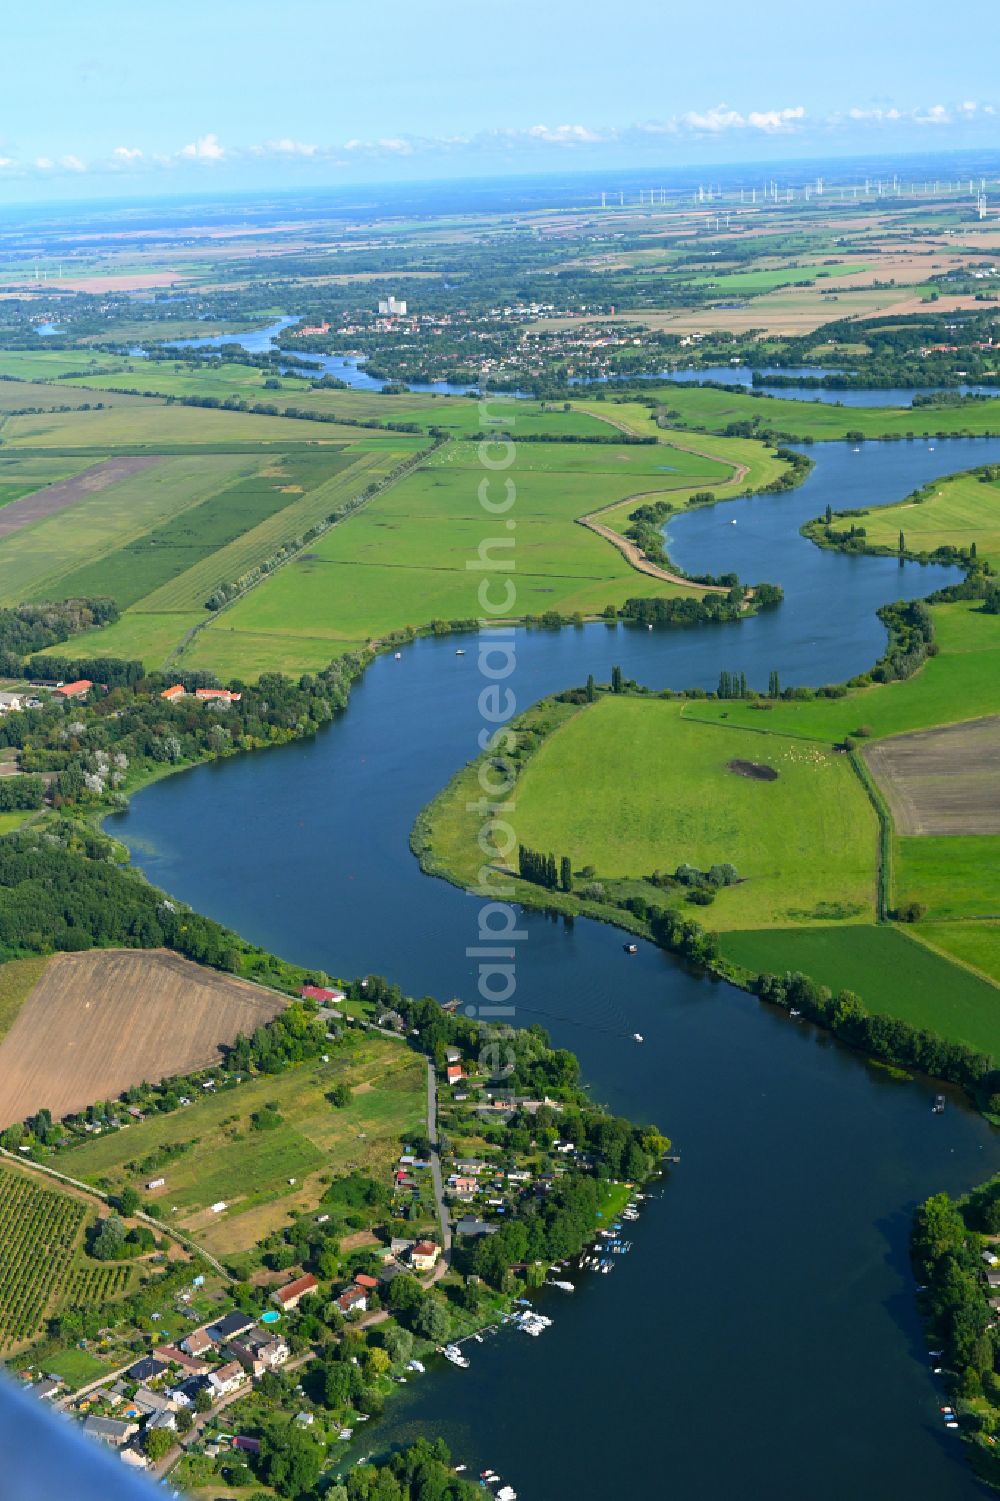 Töplitz from the bird's eye view: Waterfront landscape on the lake Havel in Toeplitz in the state Brandenburg, Germany